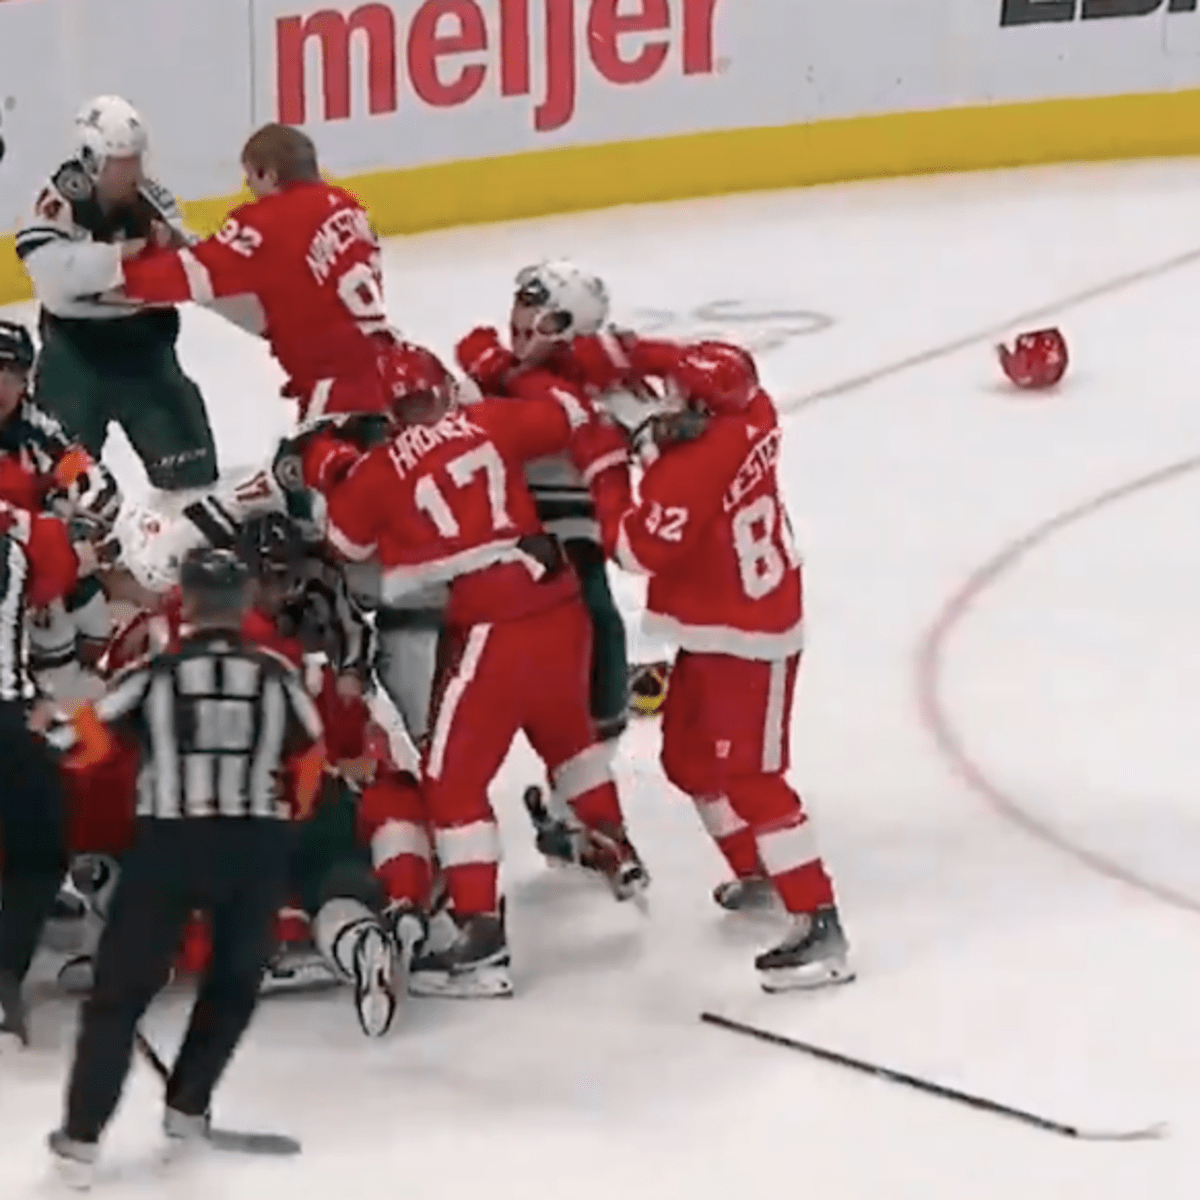 Physical Minnesota Wild too much for the banged-up Detroit Red Wings